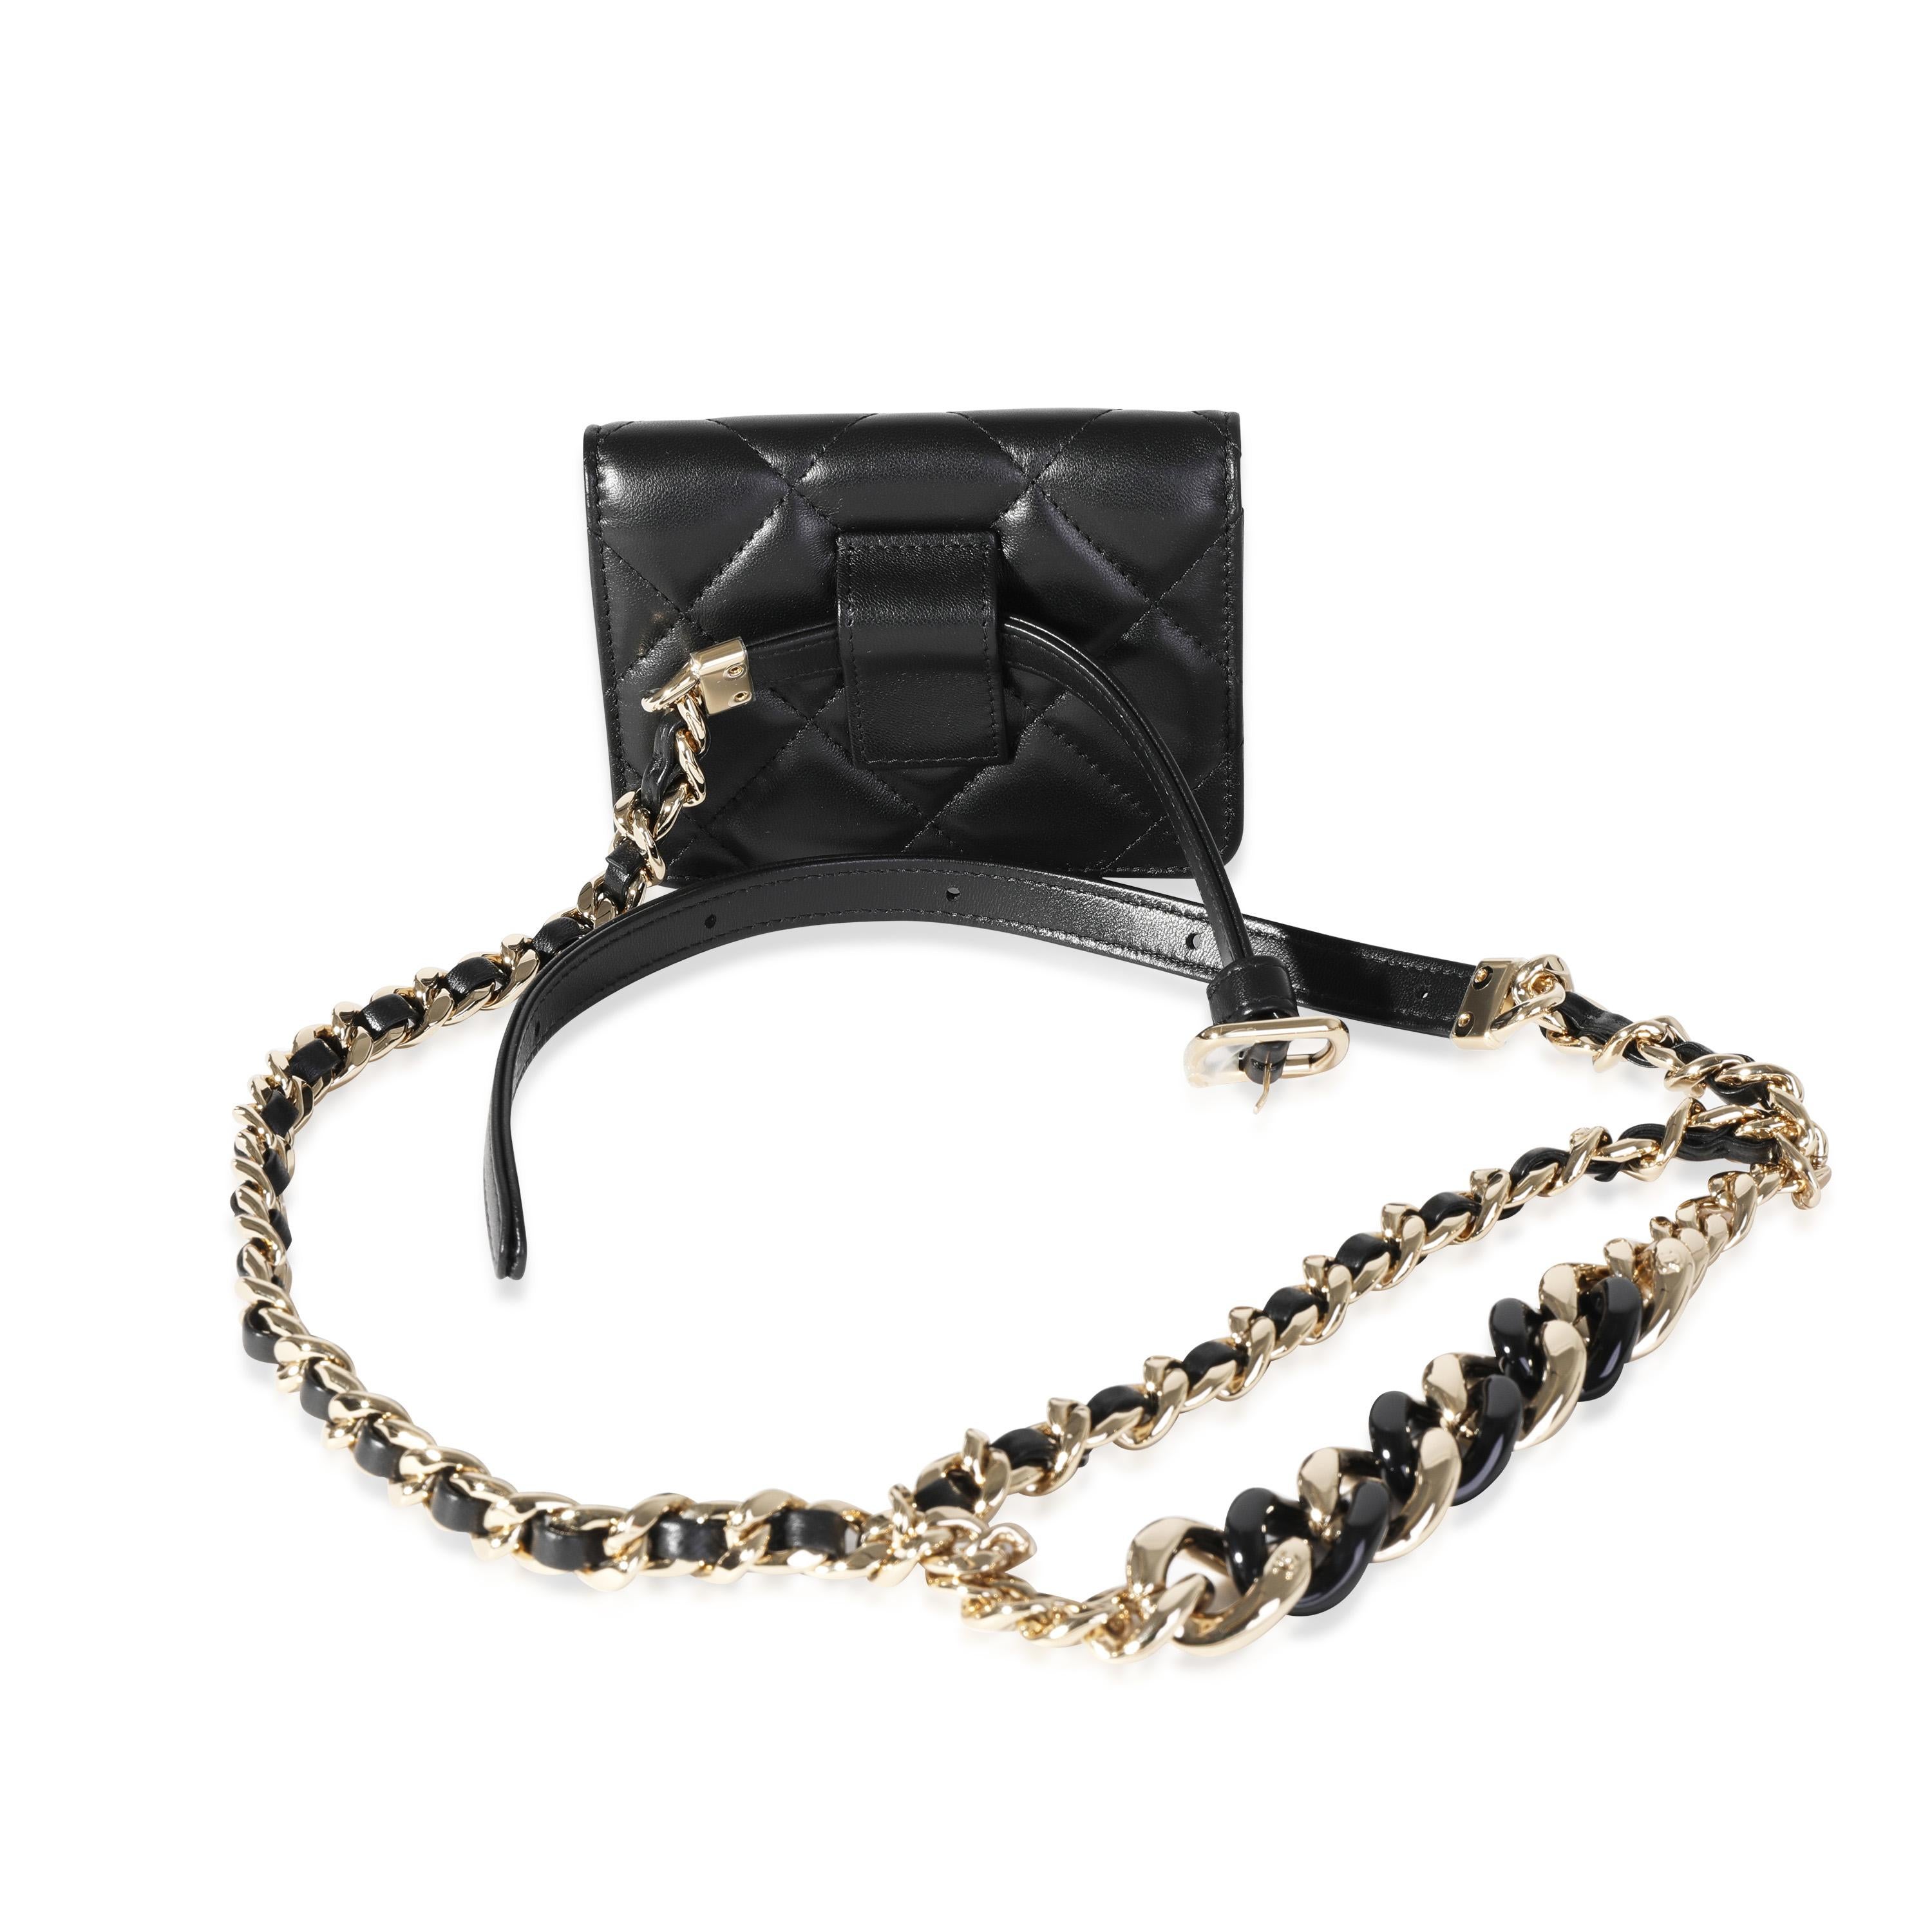 Listing Title: Chanel Black Quilted Lambskin Elegant Chain Belt Bag
SKU: 116768
Condition: Pre-owned (3000)
Handbag Condition: Never Worn
Brand: Chanel
Model: Black Quilted Lambskin Elegant Chain Belt Bag
Ligne: Elegant Chain
Origin Country: